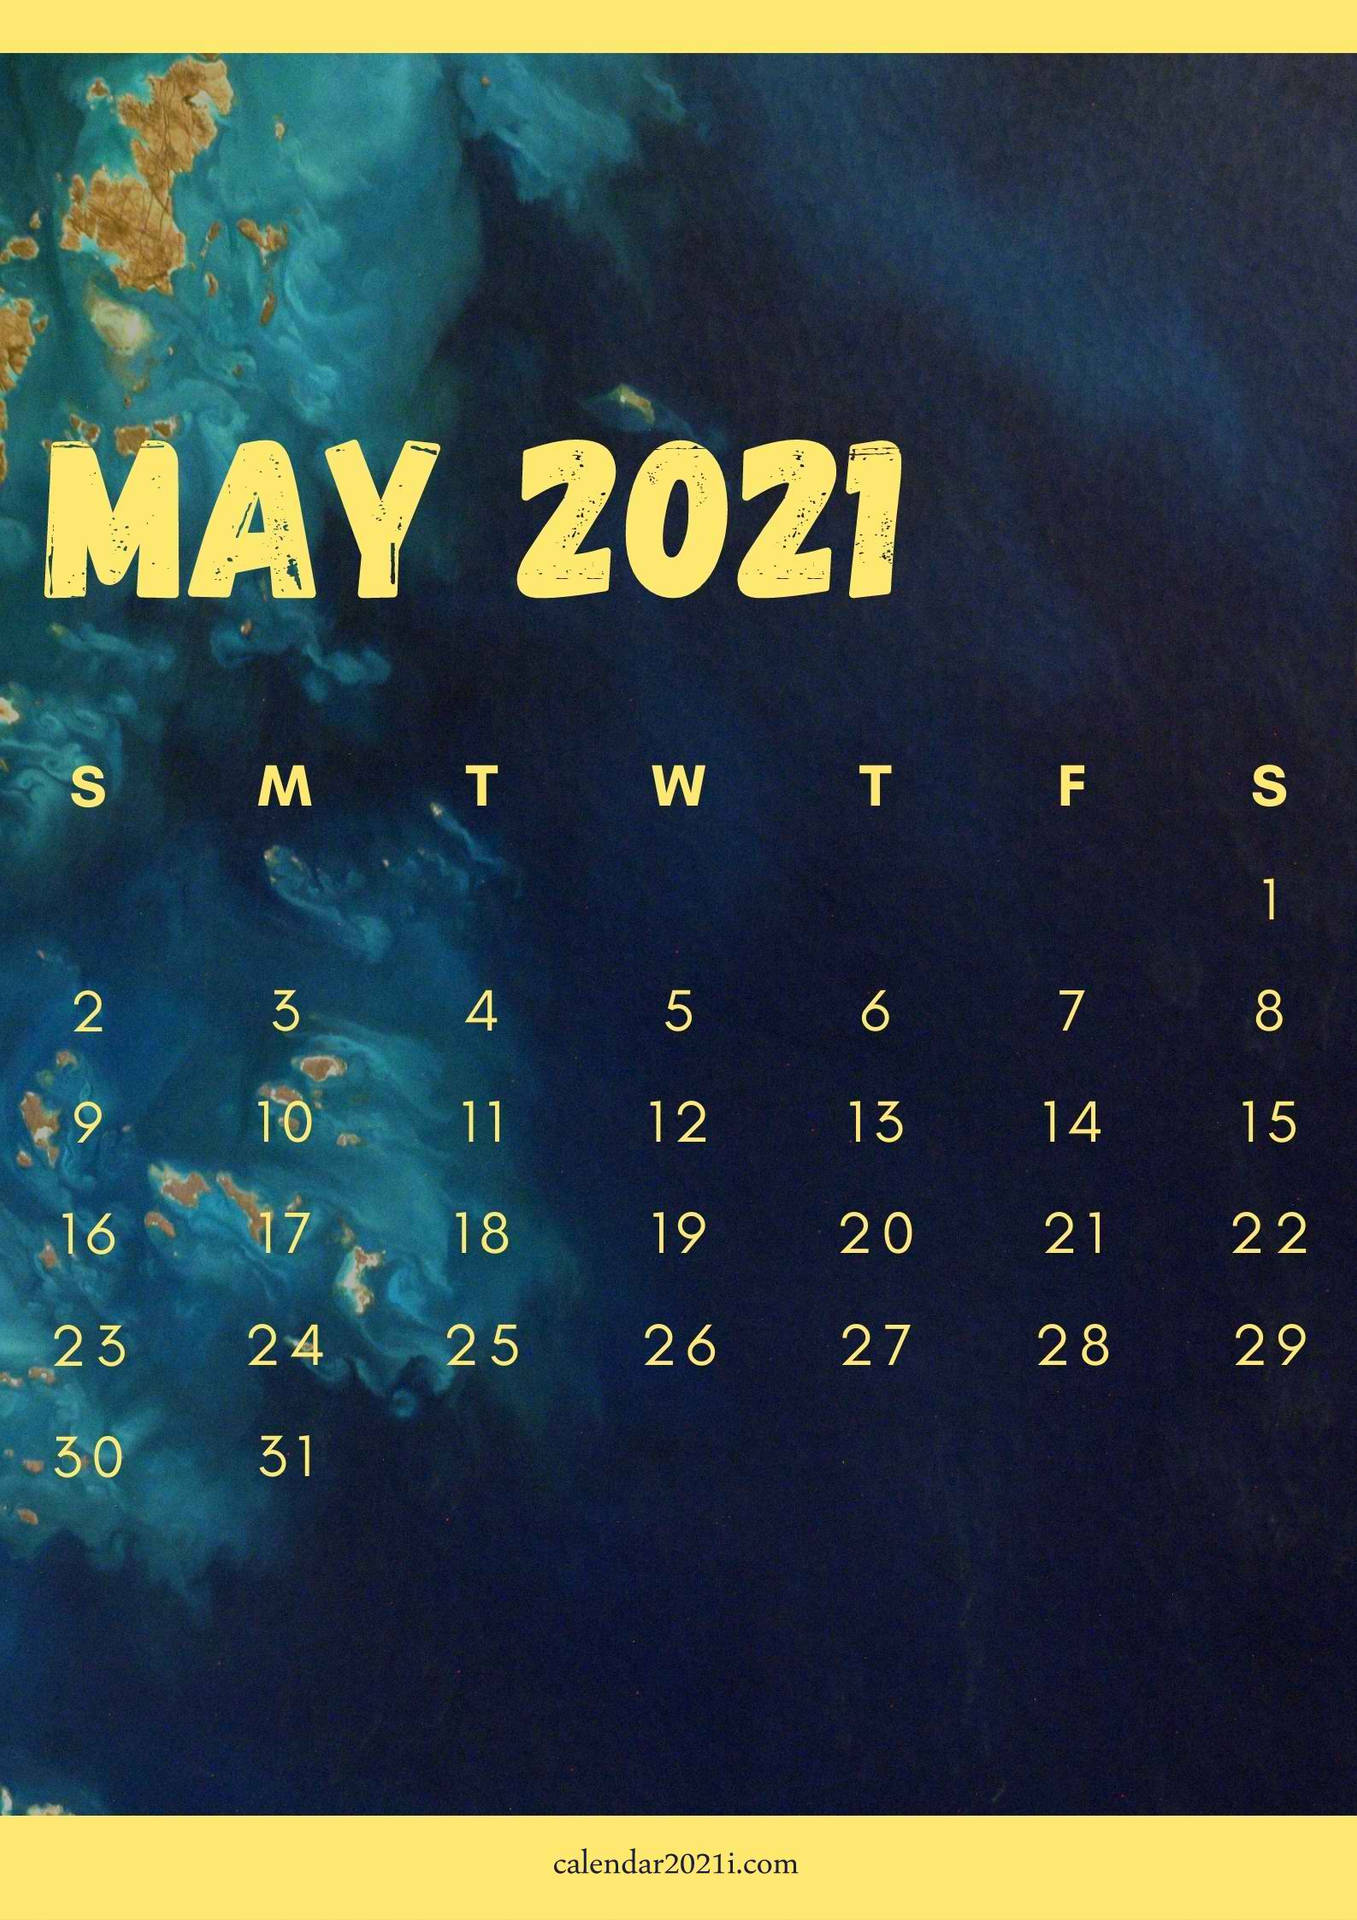 Celebrate the changing of springtime into summertime with the world map painting of May 2021. Wallpaper